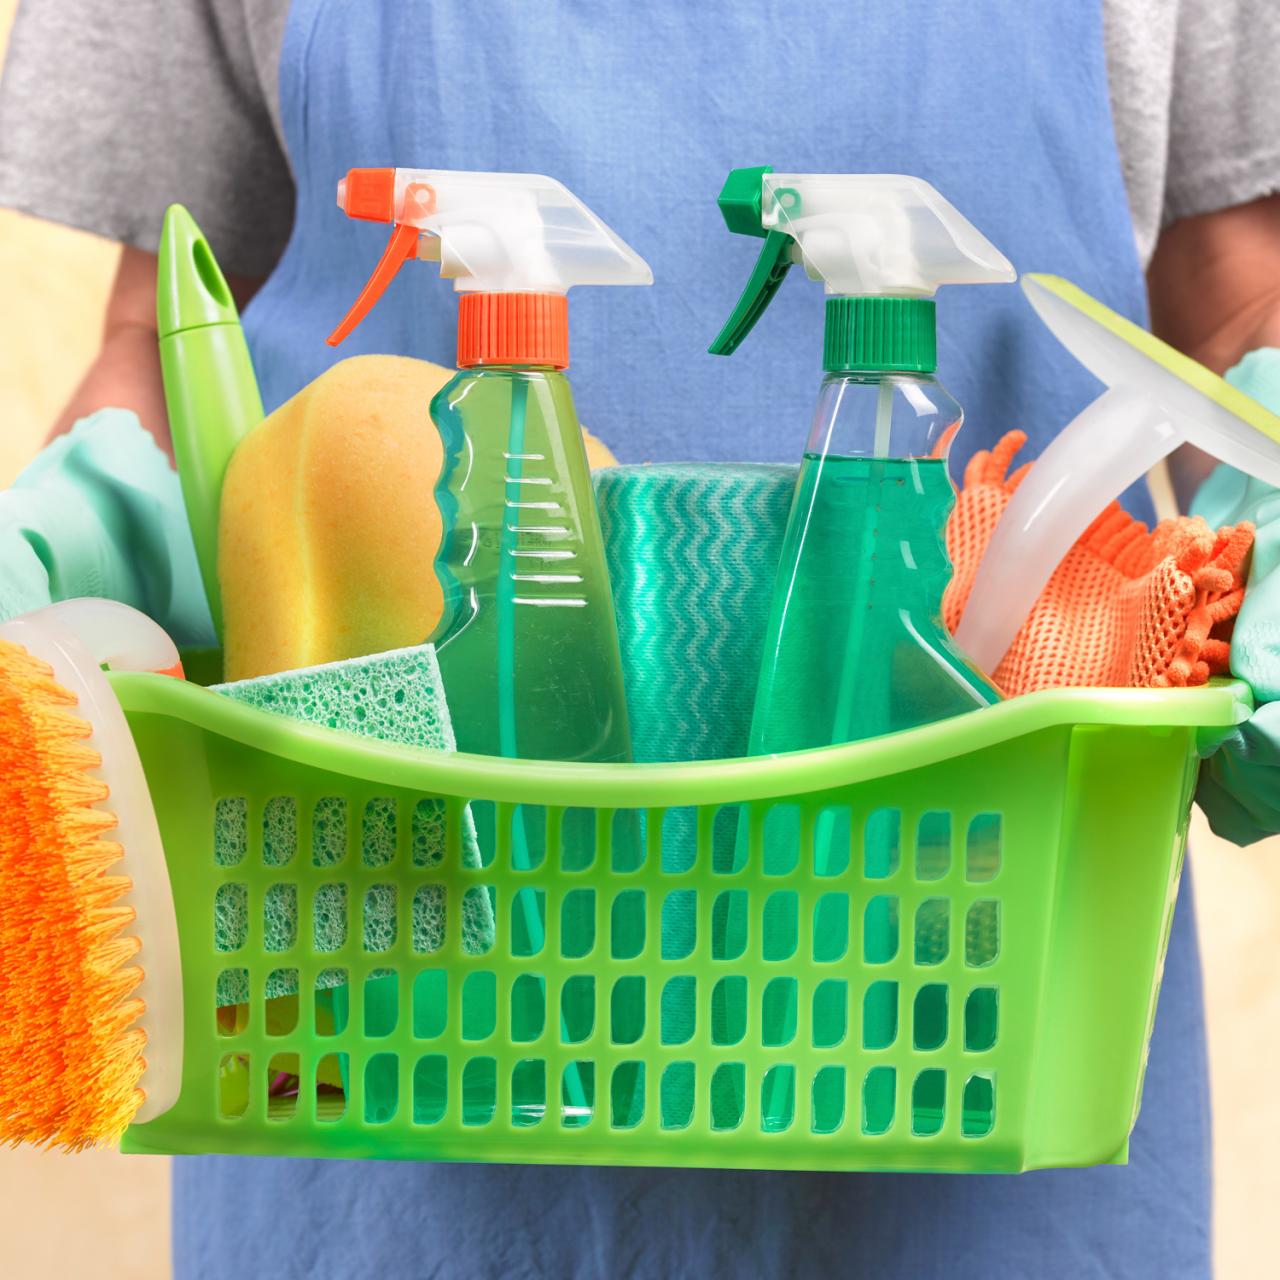 https://food.fnr.sndimg.com/content/dam/images/food/fullset/2020/05/22/fn_woman-holding-cleaning-products-getty_s4x3.jpg.rend.hgtvcom.1280.1280.suffix/1590169018707.jpeg